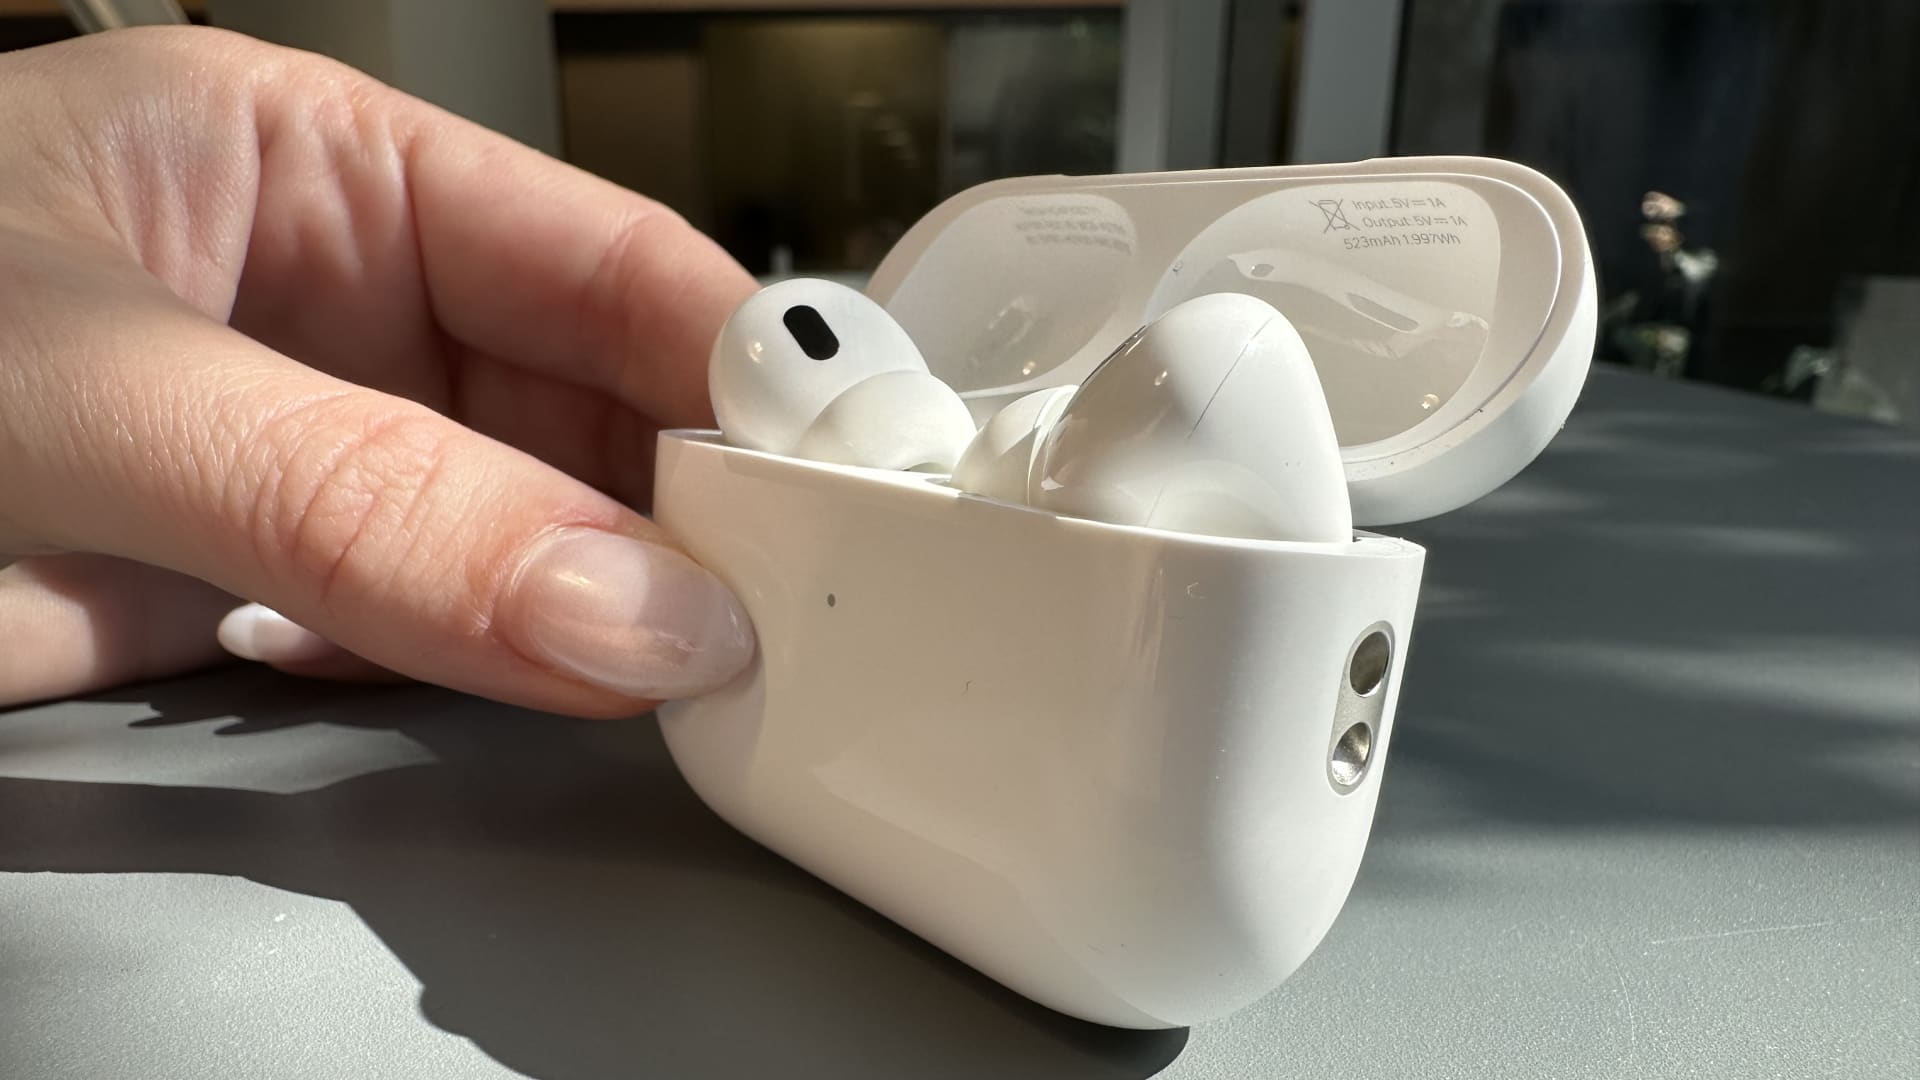 Apple's new AirPods Pro are worth the $249 even if you already own the older version